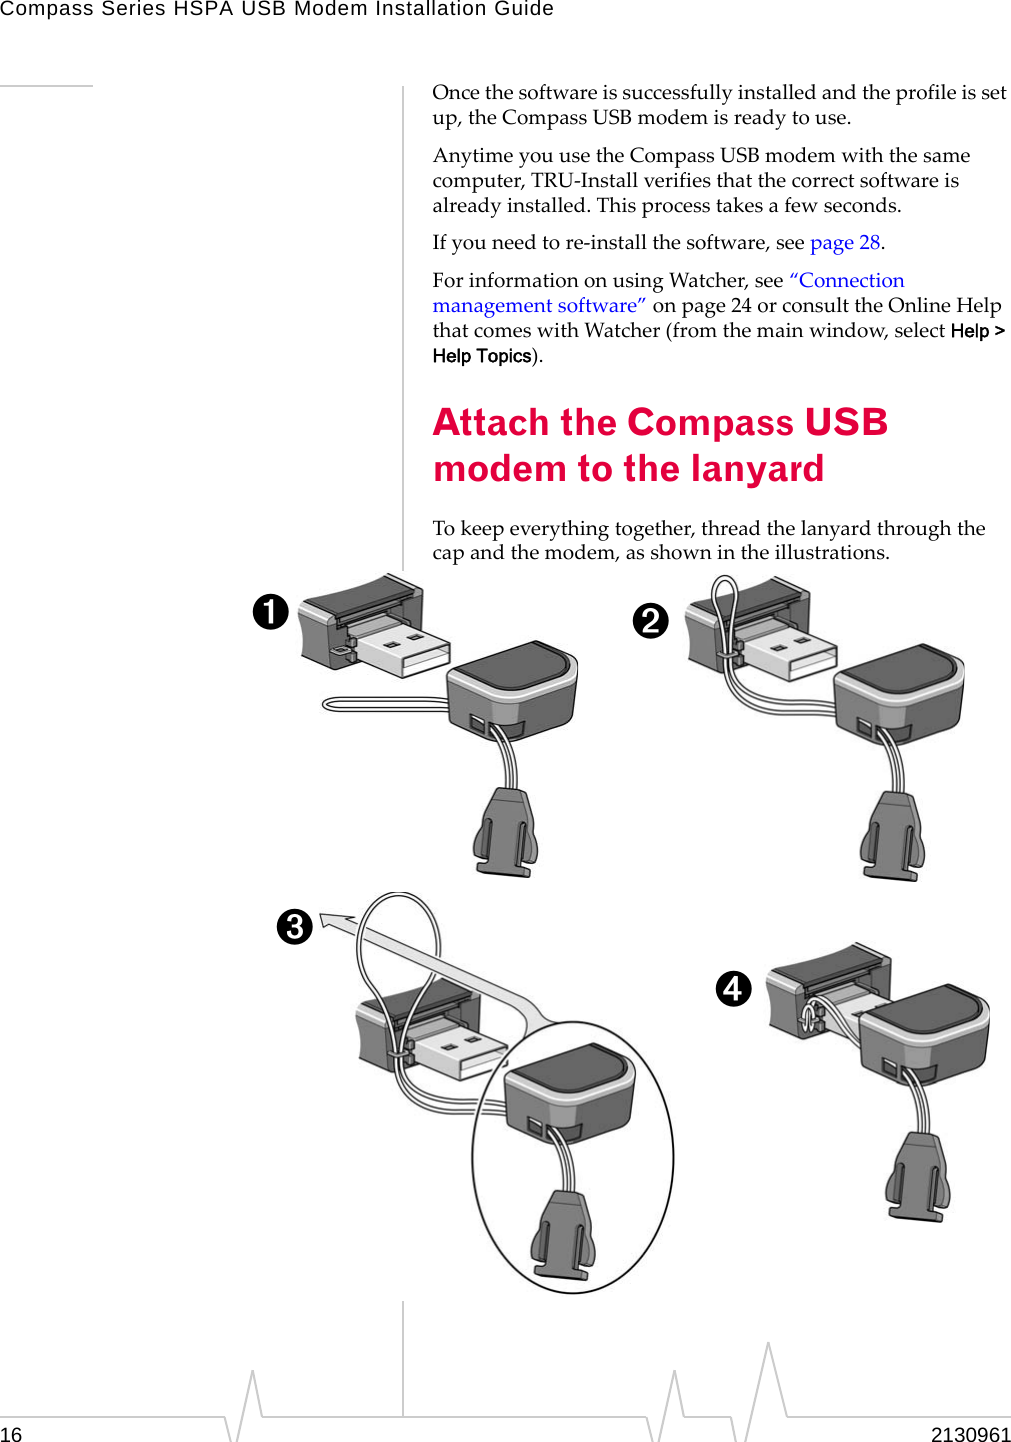 Compass Series HSPA USB Modem Installation Guide 2130961 Once the software is successfully installed and the profile is set up, the Compass USB modem is ready to use. Anytime you use the Compass USB modem with the same computer, TRU-Install verifies that the correct software is already installed. This process takes a few seconds. If you need to re-install the software, see page 28. For information on using Watcher, see “Connection management software” on page 24 or consult the Online Help that comes with Watcher (from the main window, select Help &gt; Help Topics). Attach the Compass USB modem to the lanyard To keep everything together, thread the lanyard through the cap and the modem, as shown in the illustrations. ➊ ➋ ➌ ➍ 16 